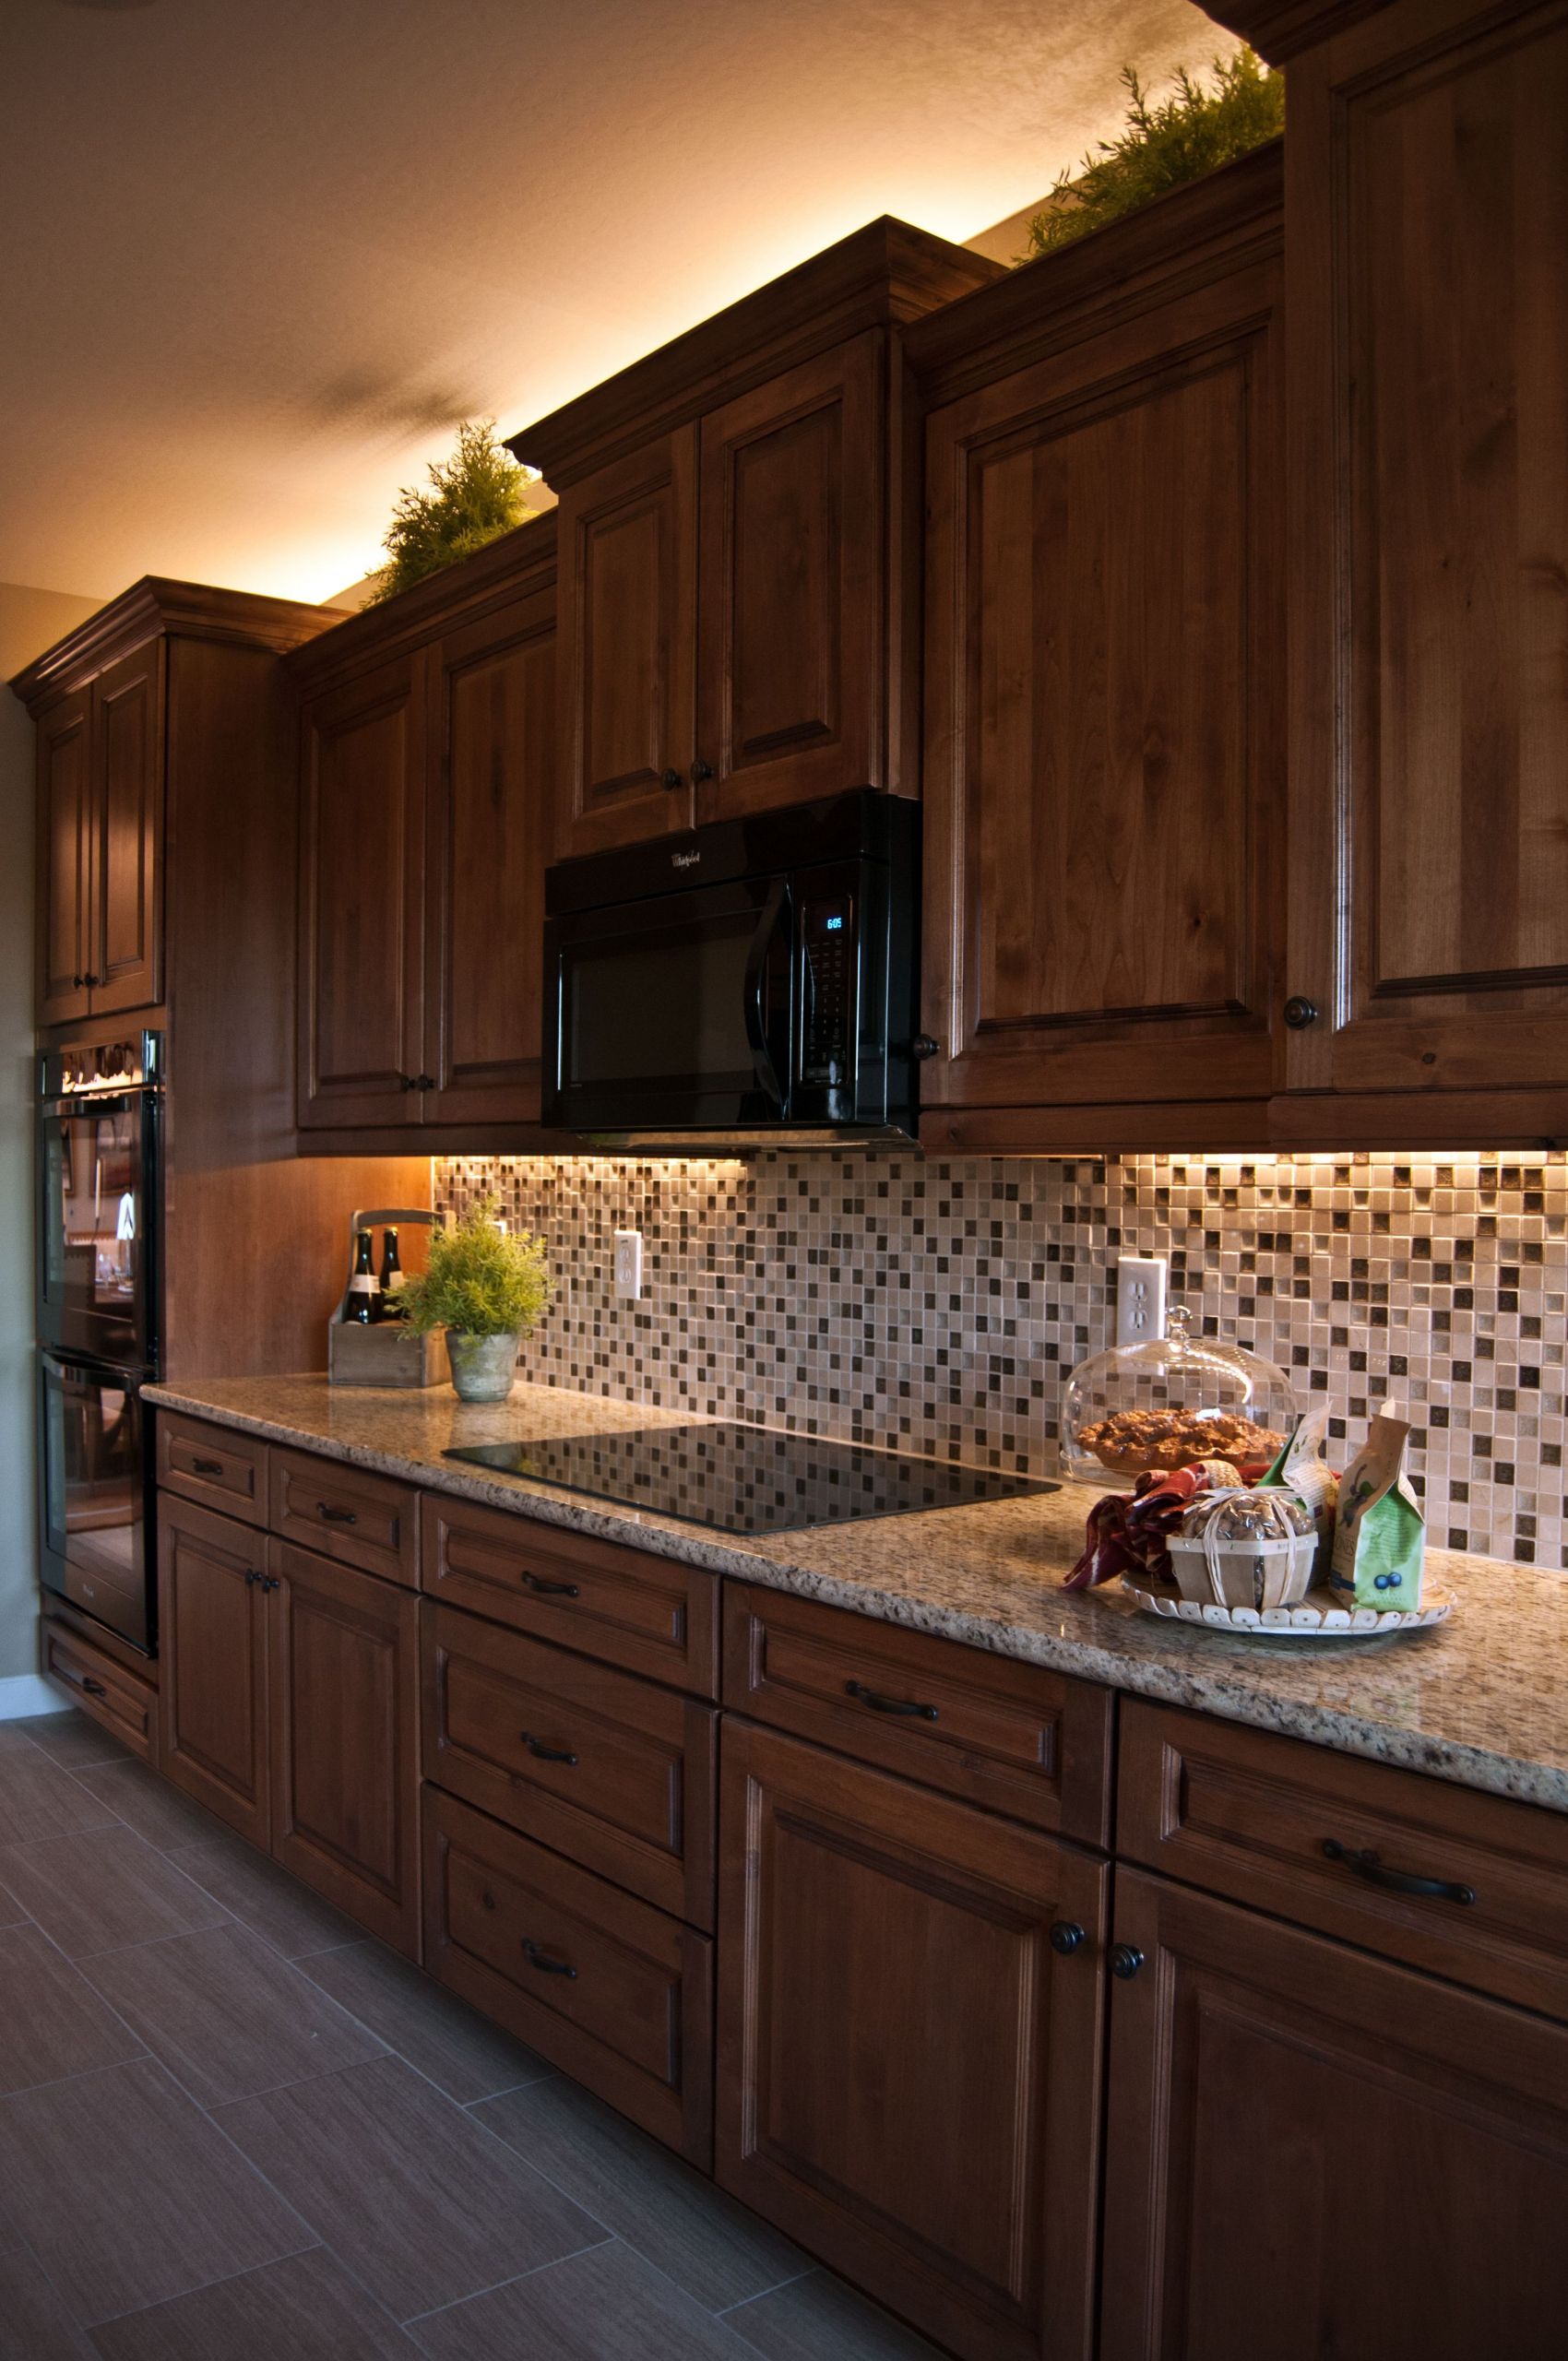 Led Under Kitchen Cabinet Lights
 Inspired LED lighting in traditional style kitchen warm